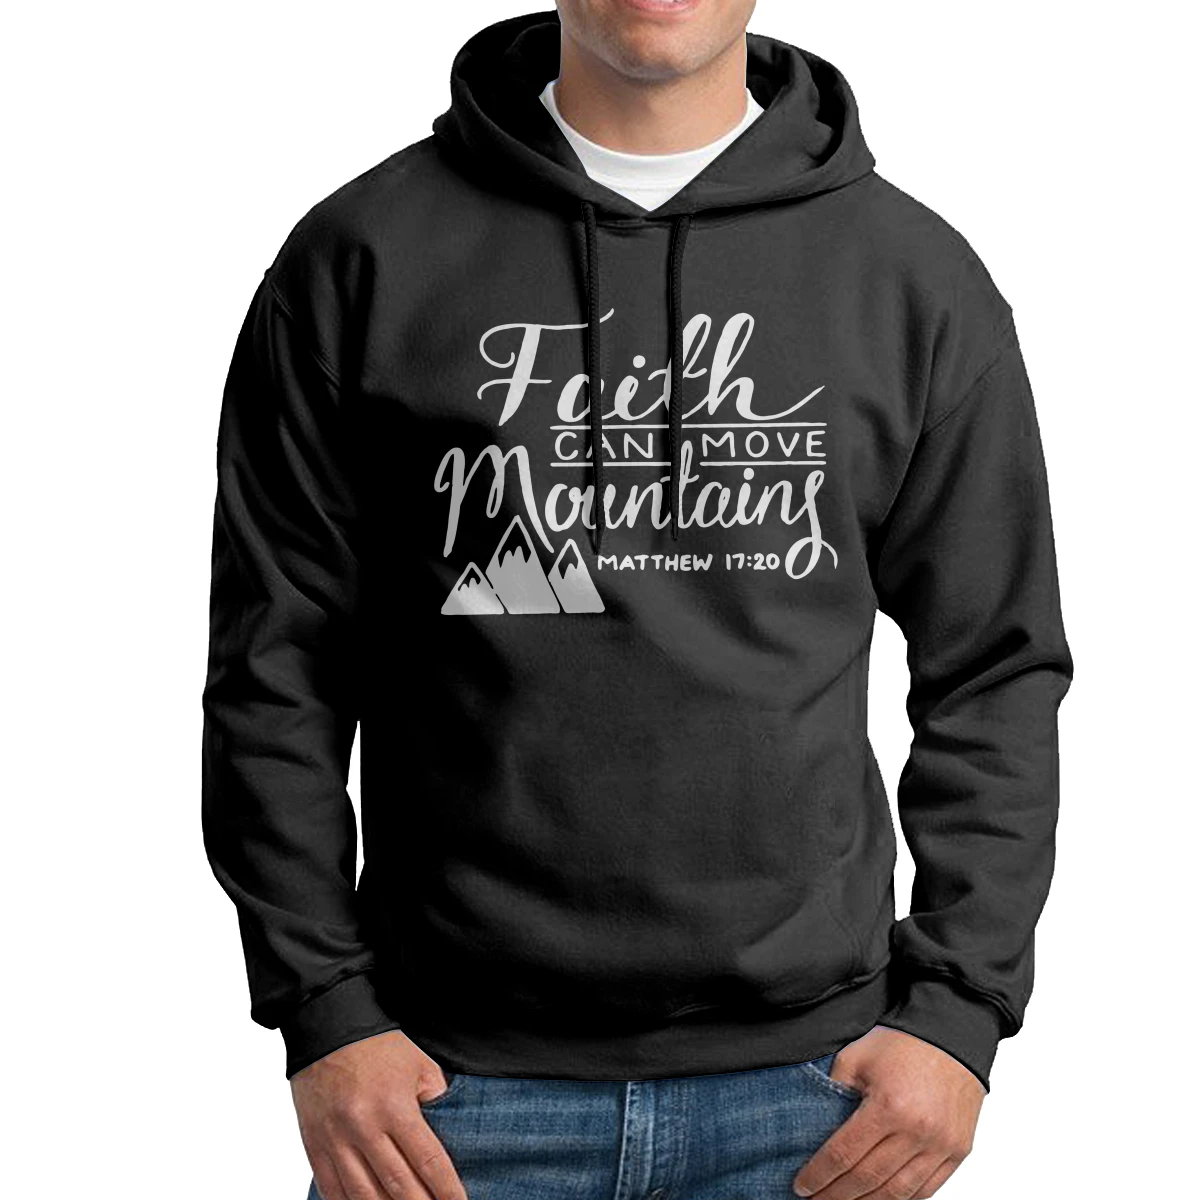 

Man Faith Can Move Mountains Hoodies Graphic Purified Cotton Hooded Sweatshirts Vintage Hoodie Shirt